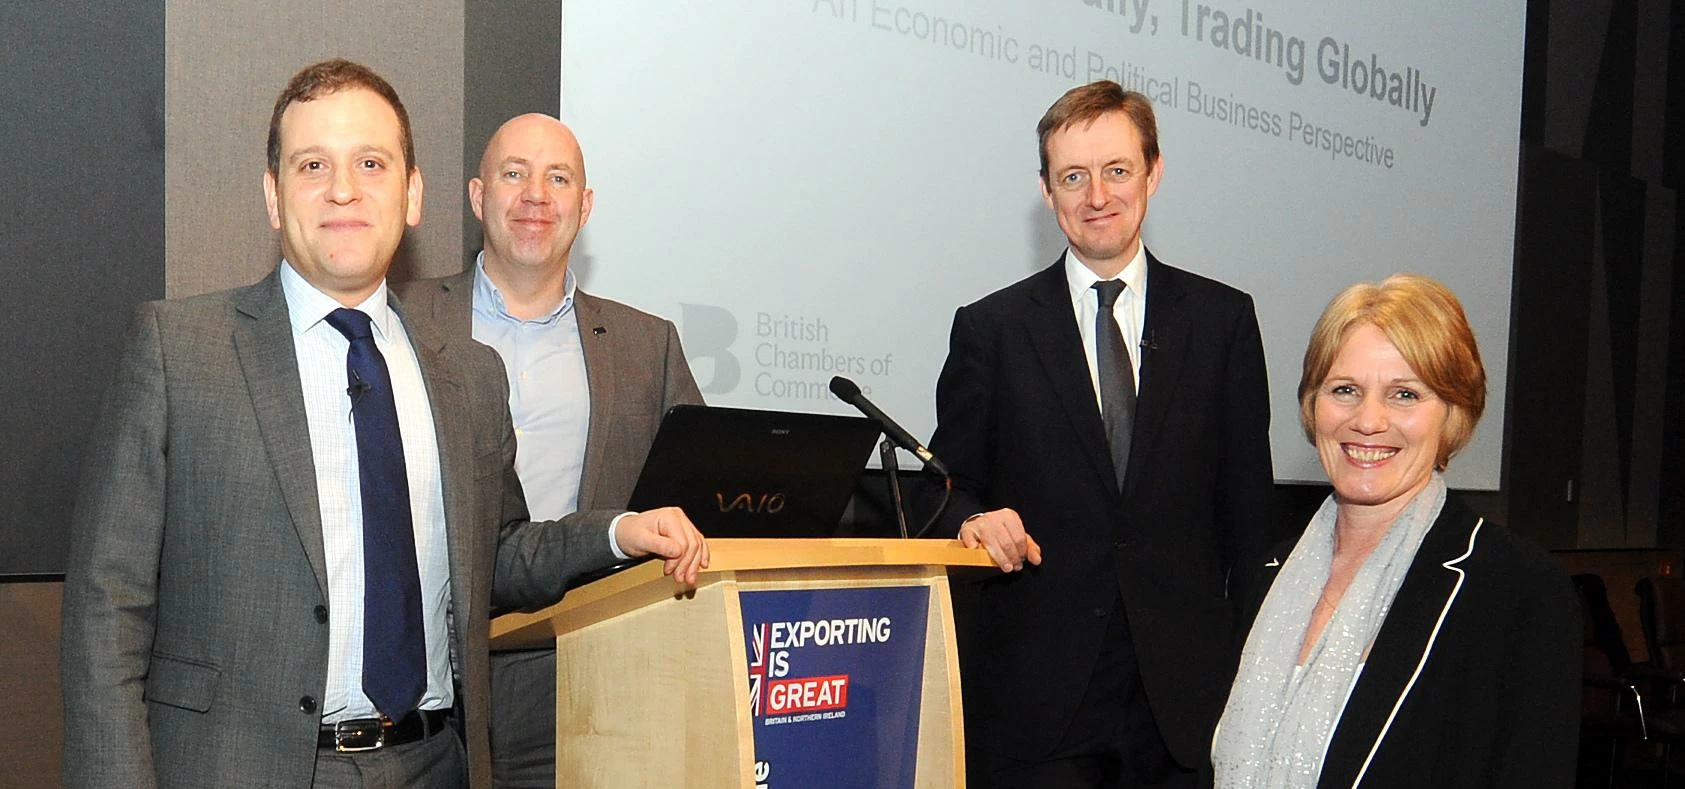 Pictured (left to right): Dr Adam Marshall, Corin Crane (Black Country Chamber of Commerce), Lord Br